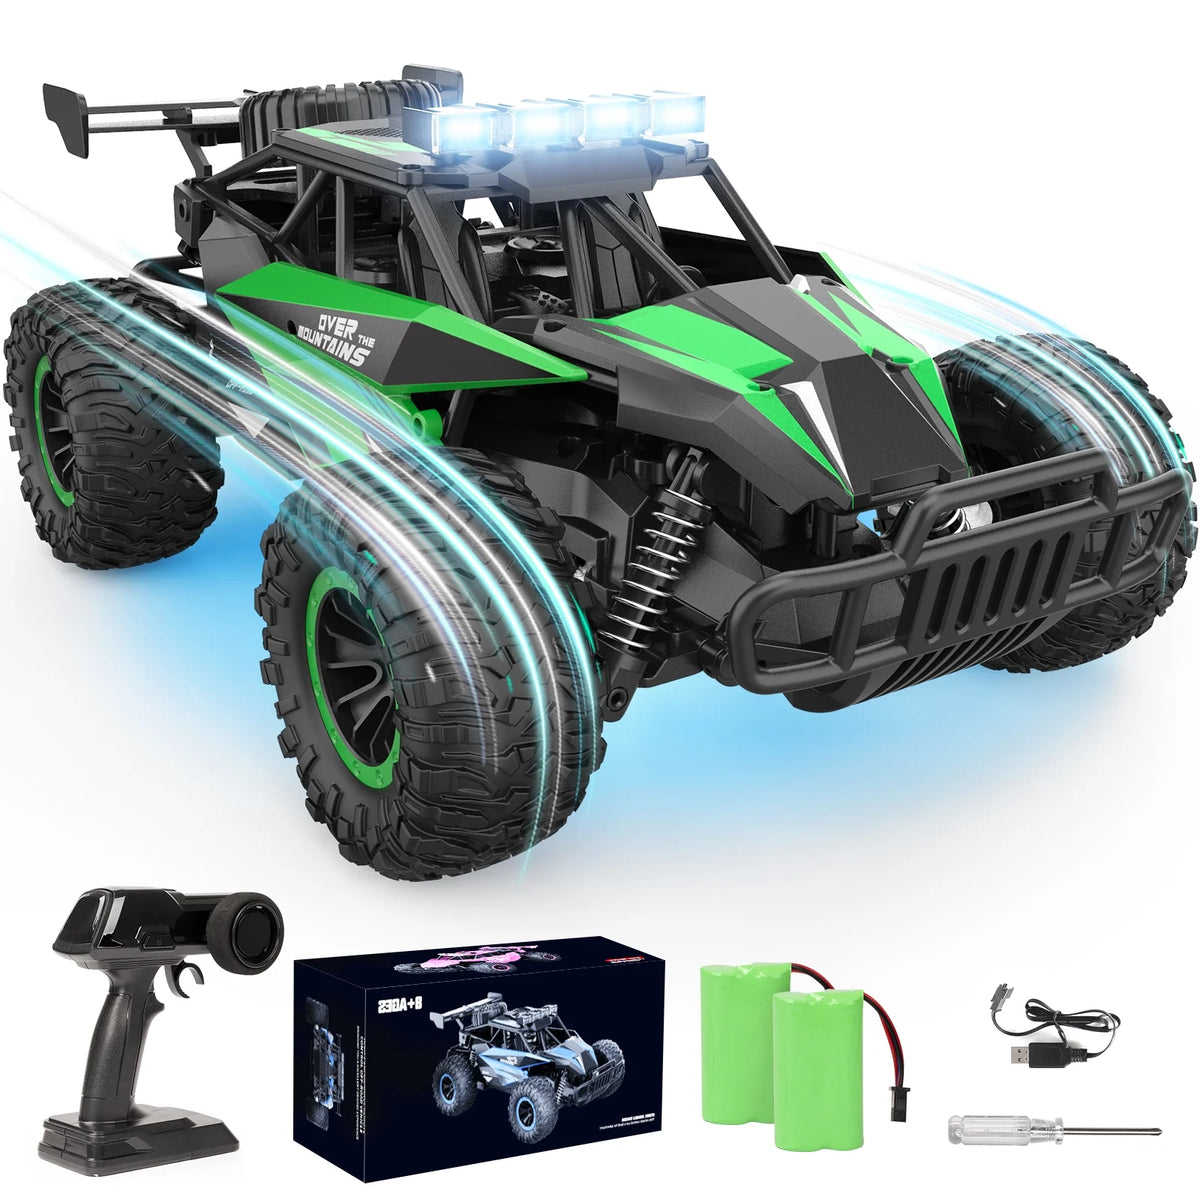 RC Cars 20 Km/h Remote Control Car RC Monster Trucks Off Road Vehicle Gift for Boys Kids with Chassis Lights 2 Batteries, 13 Inch All Terrains, Green